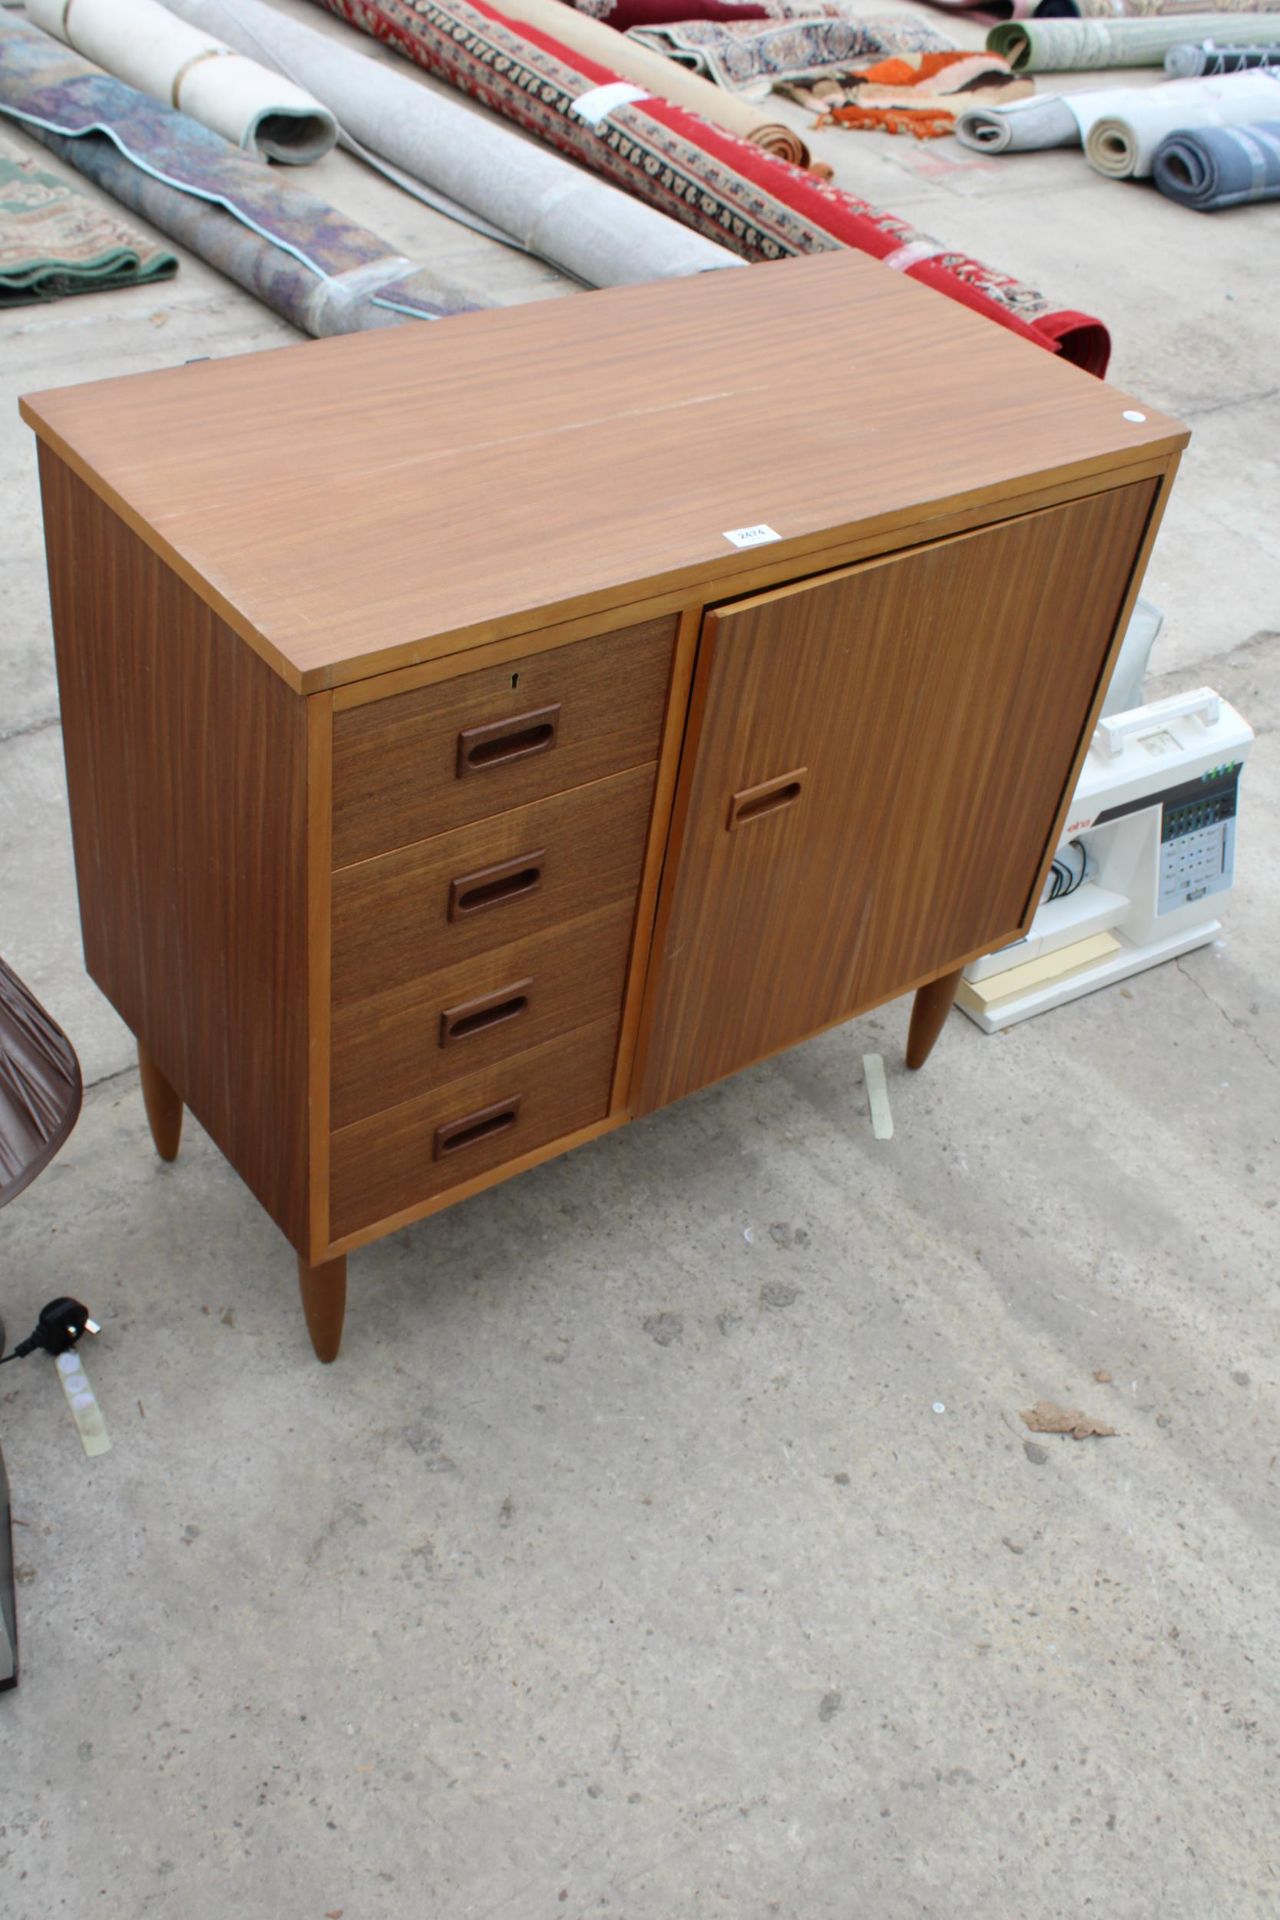 A RETRO TEAK SEWING CABINET WITH ELECTRIC SINGER SEWING MACHINE AND ACCESSORIES - Image 5 of 5